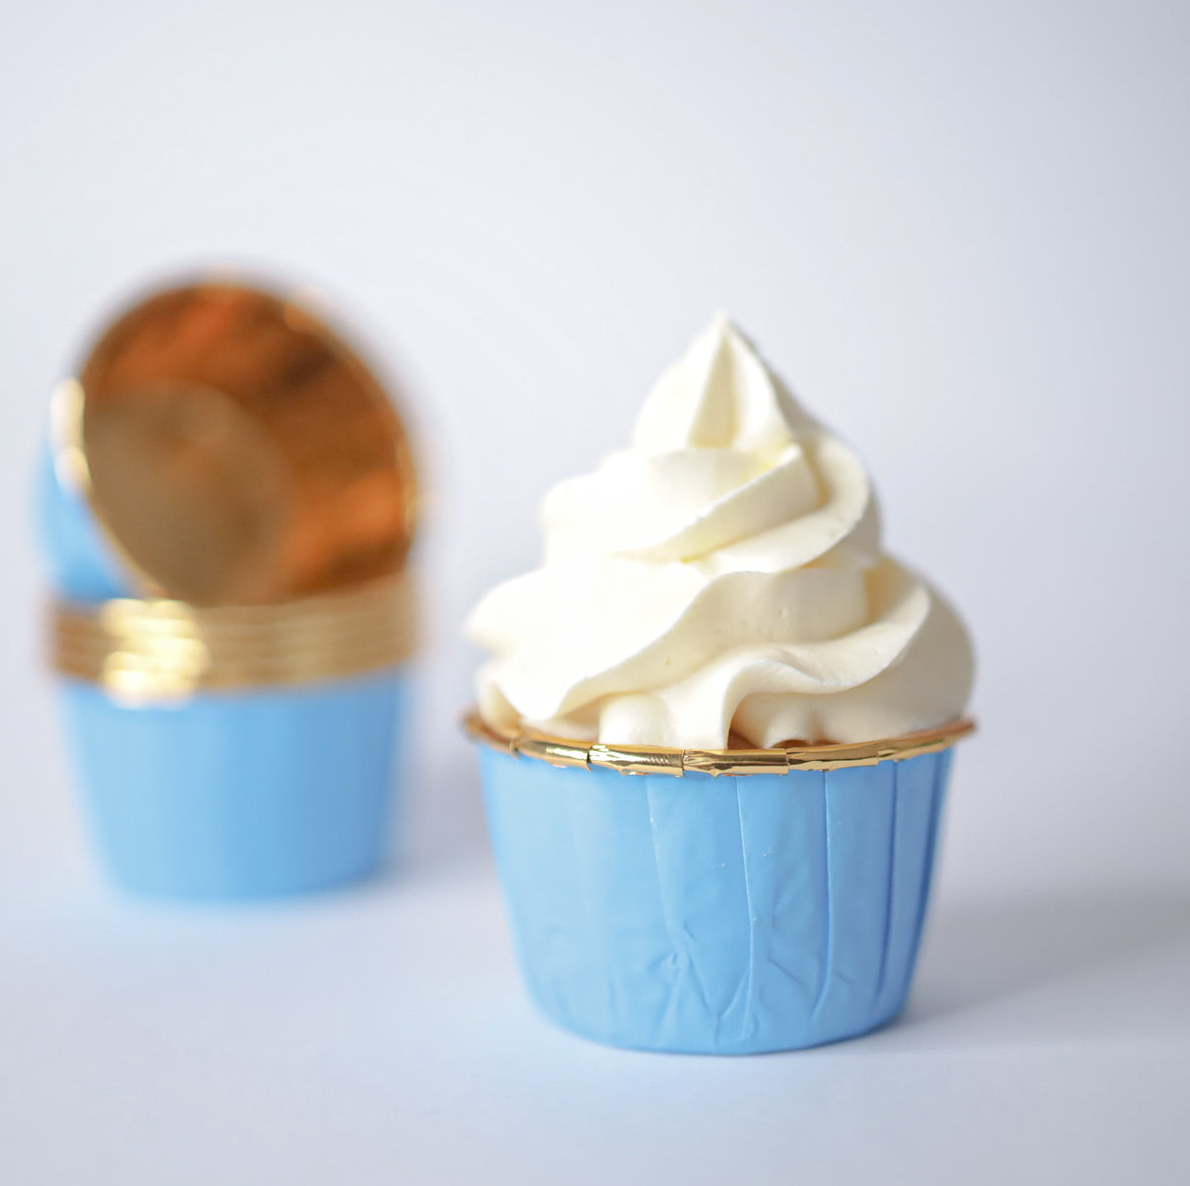 BLUE GOLD TRIM BAKING CUPS BY SWEET STAMP